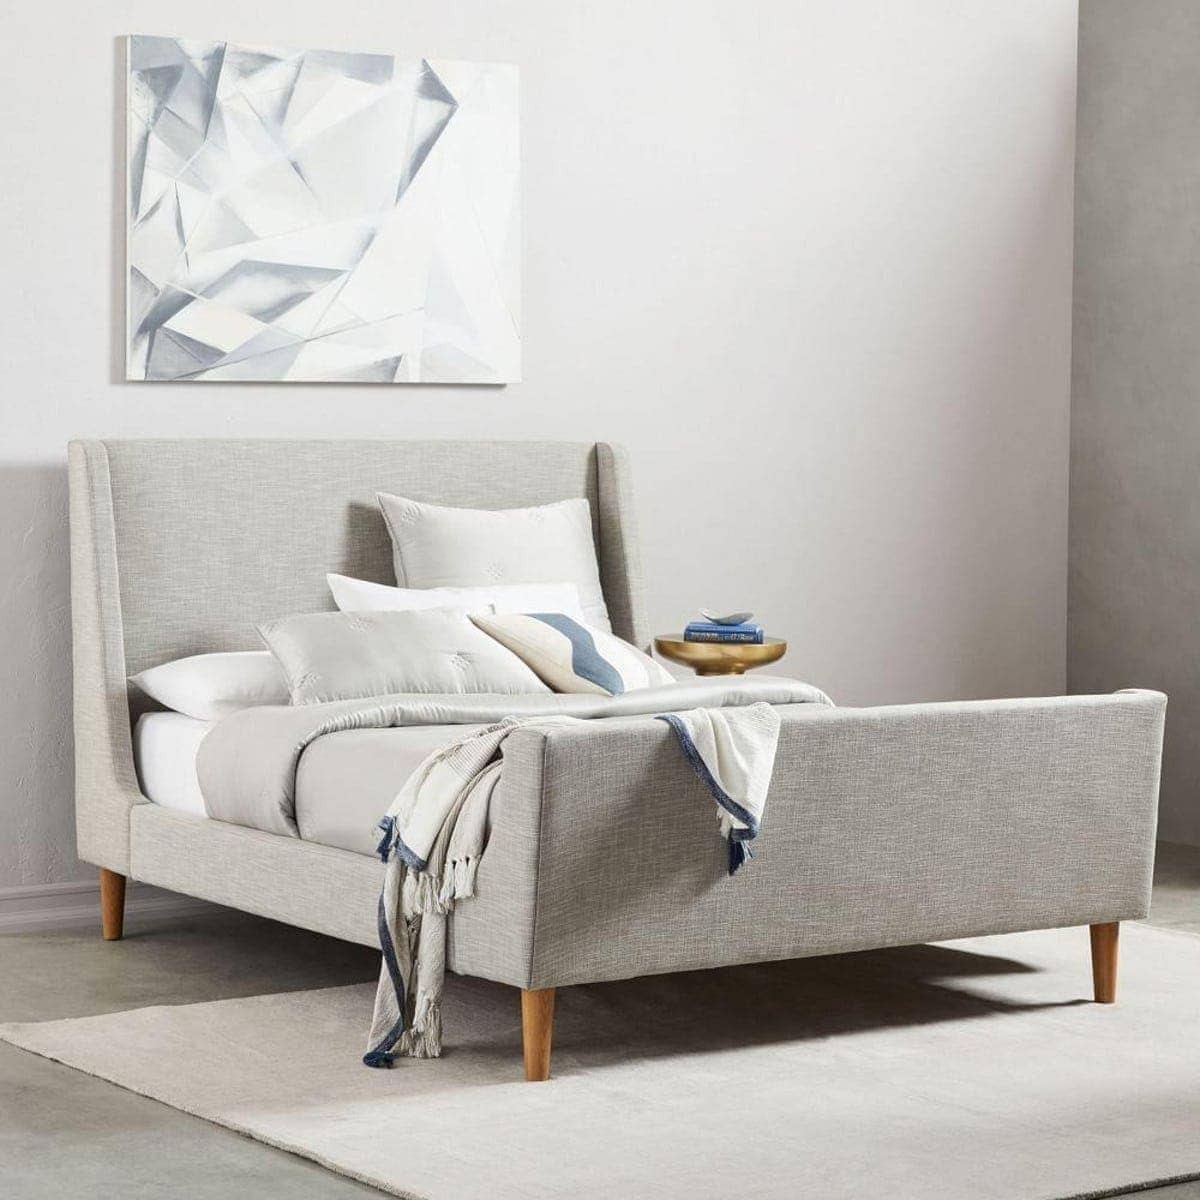 upholstered sleigh bed from west elm in light grey fabric